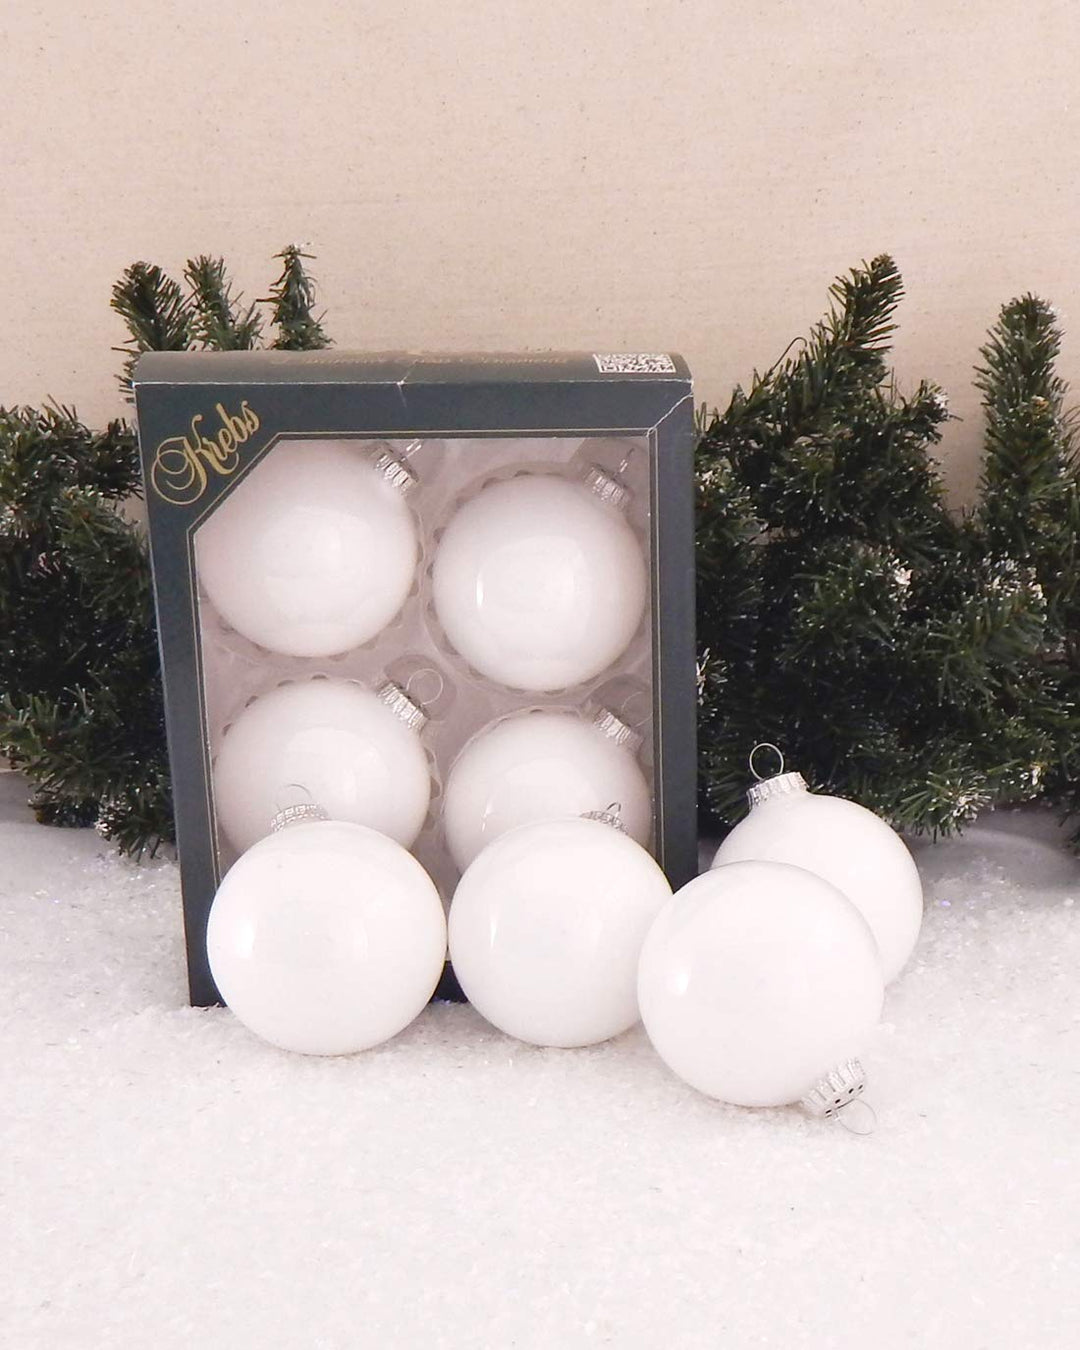 Glass Christmas Tree Ornaments - 80mm / 3.25" [4 Pieces] Designer Balls from Christmas By Krebs Seamless Hanging Holiday Decor (Porcelain White)